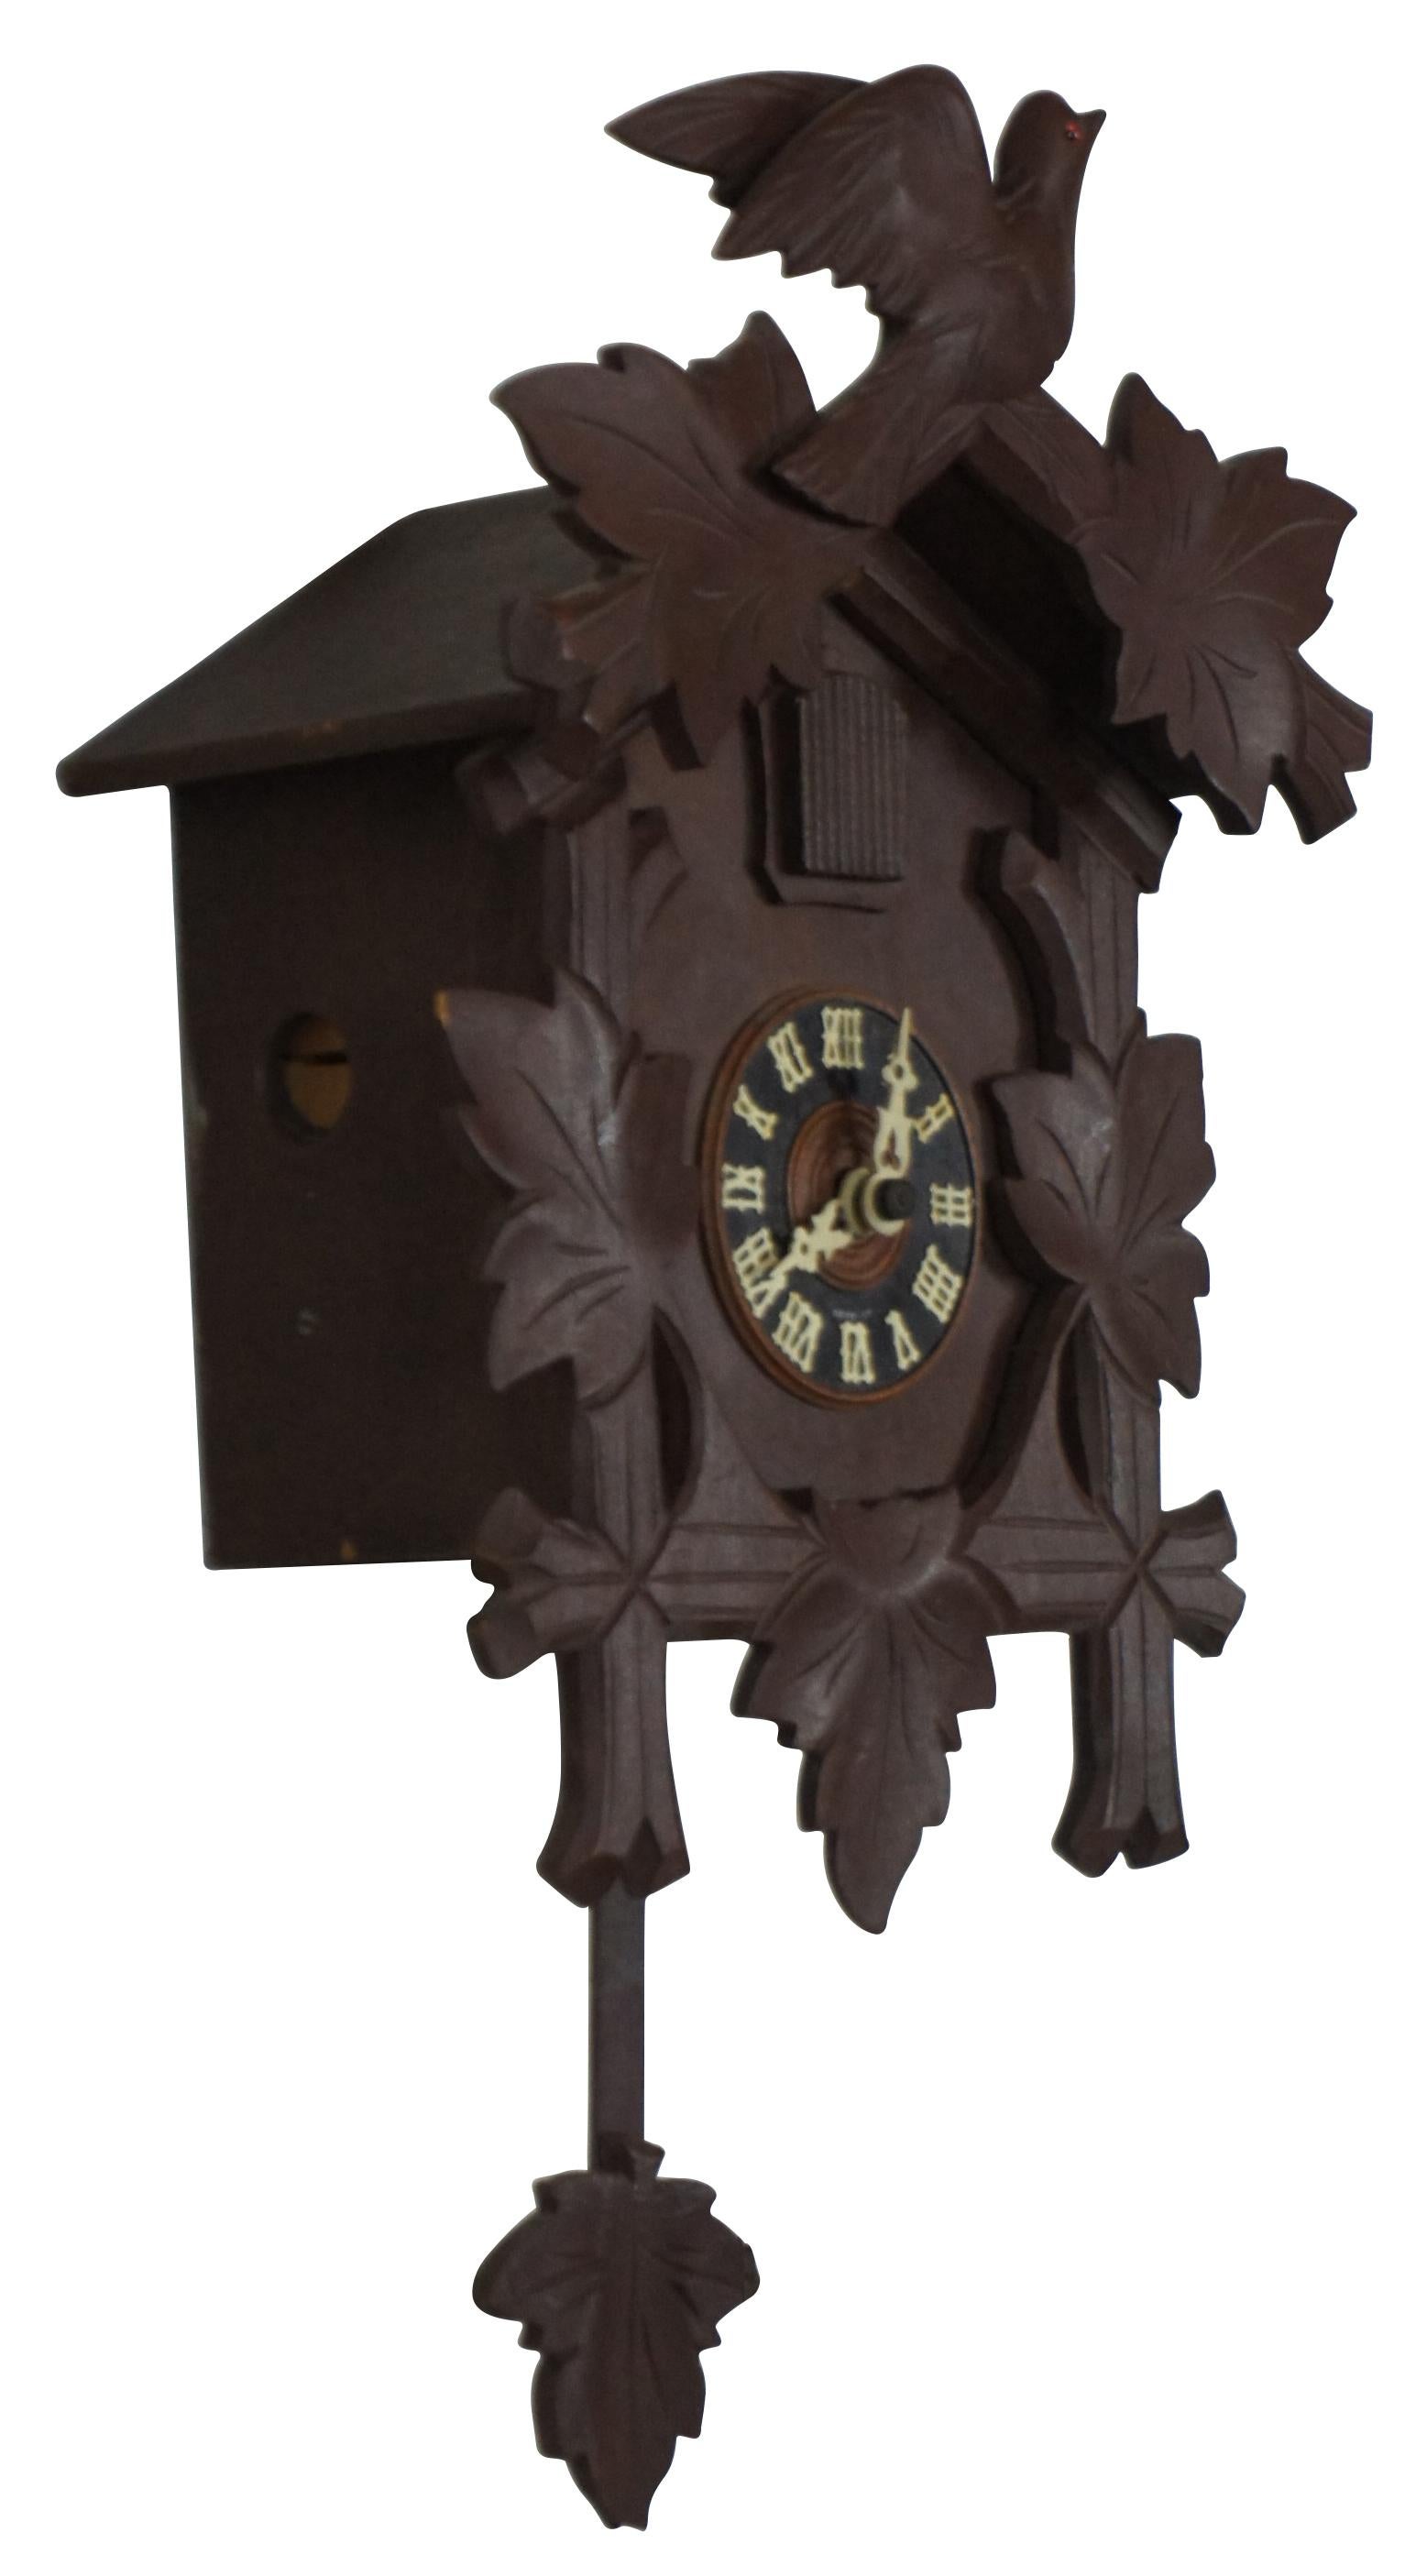 Antique circa 1930’s German Black Forest cuckoo clock decorated with carved branches, leaves and bird with orange glass eye; includes two pine cone weights. G. M. Angem works, marked on back German 605 F.
 